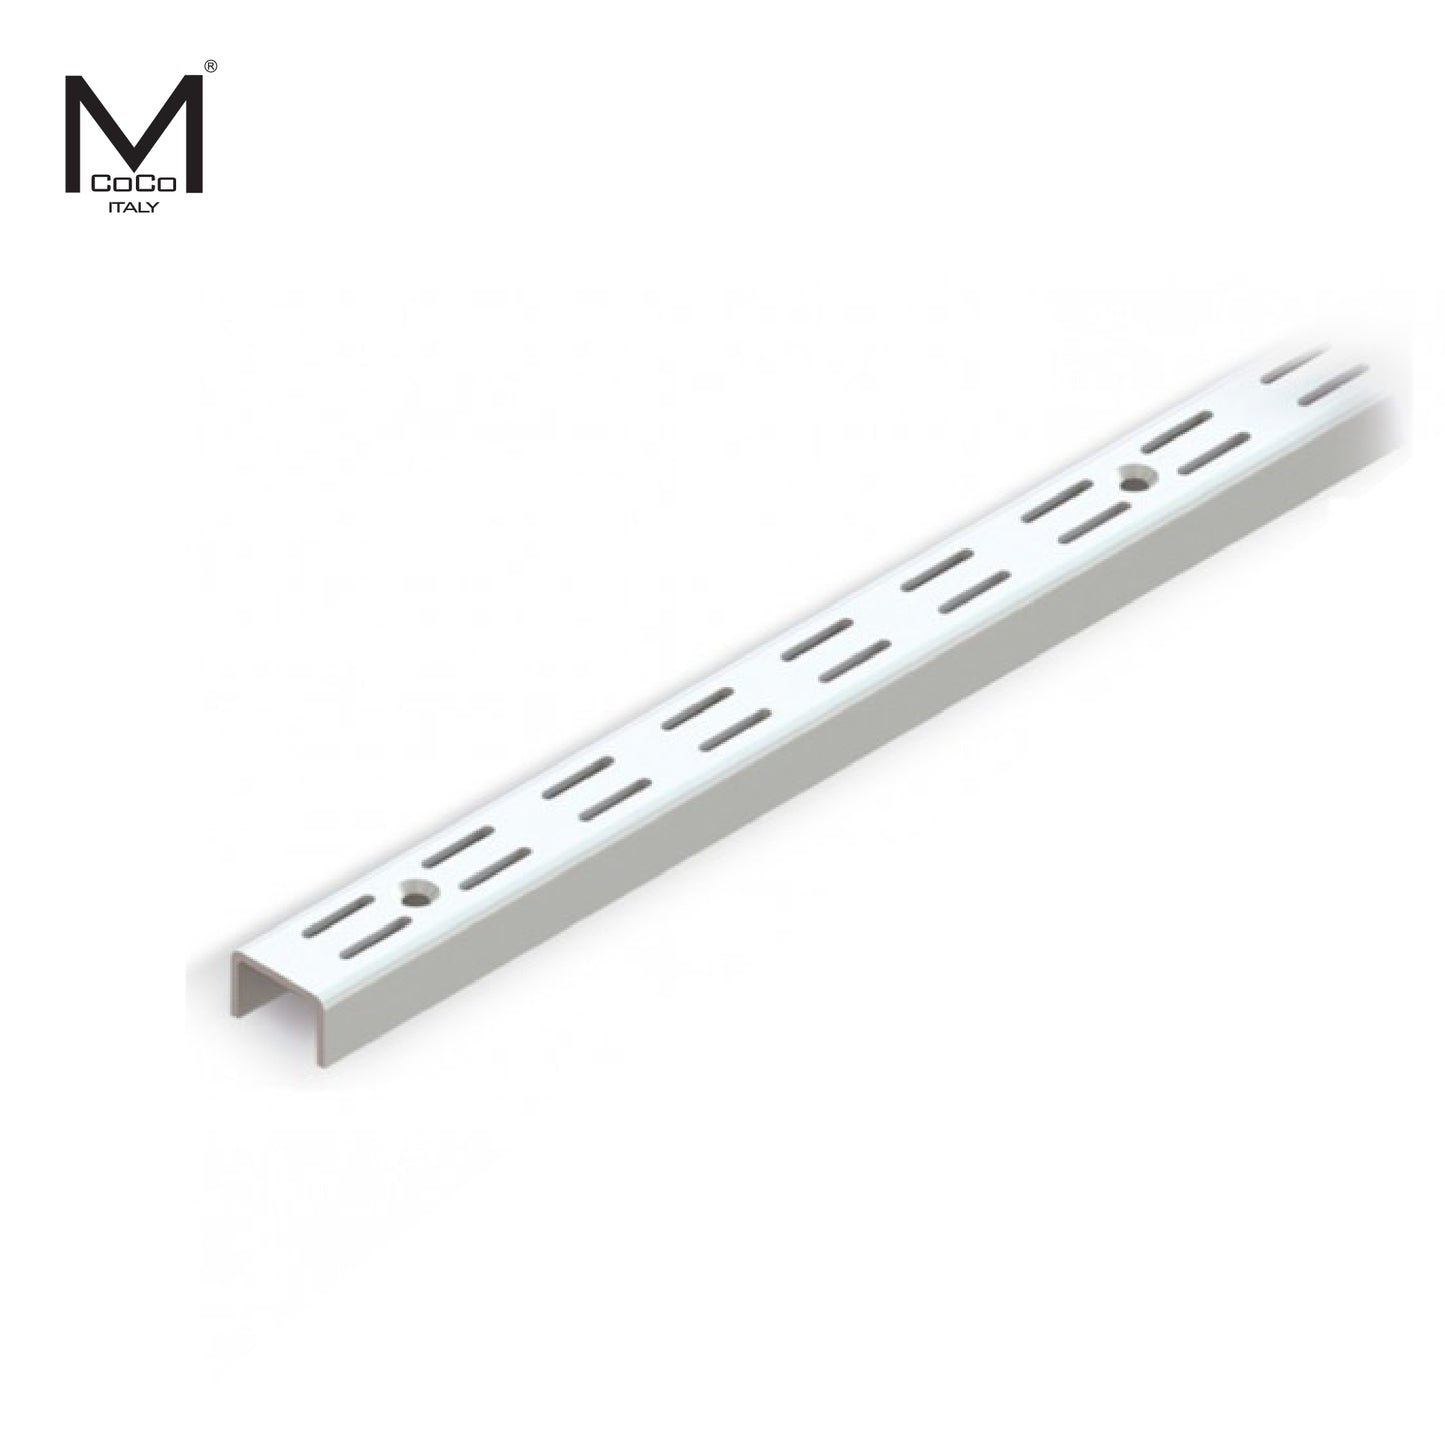 Mcoco Sonice Shelf Bar, Sizes 6.75 to 94 Inches, White Colour- BAR